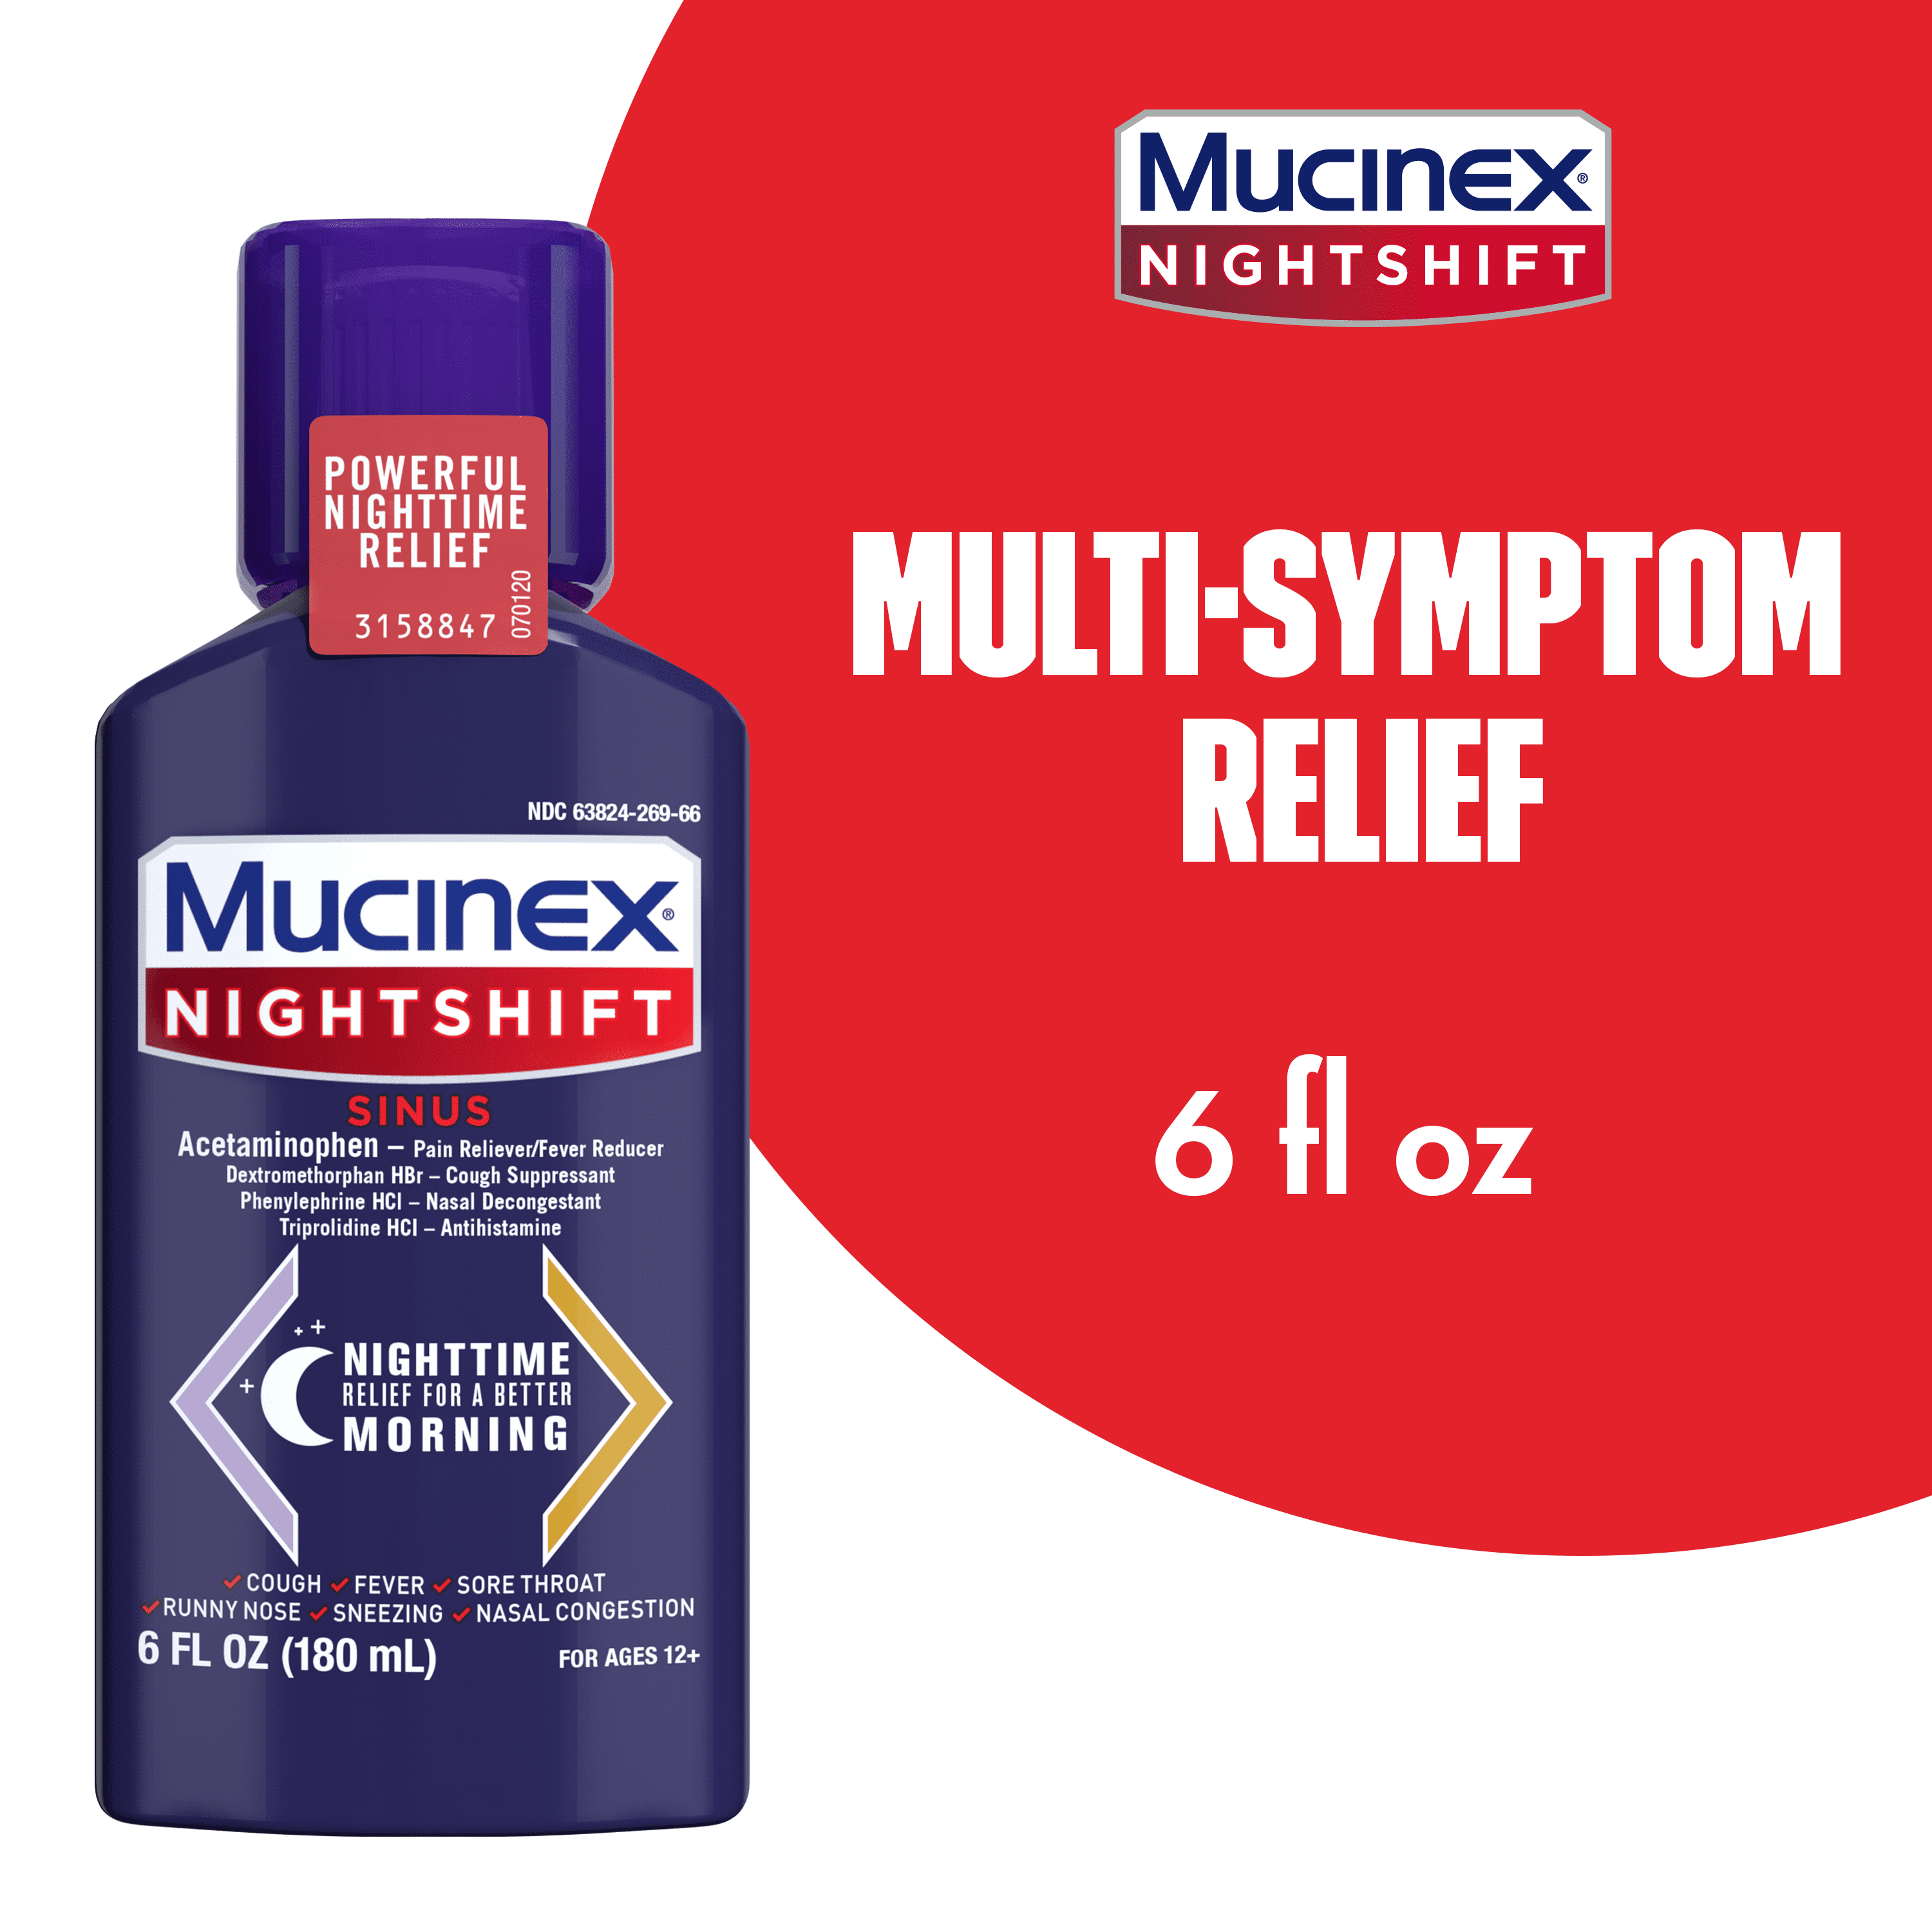 MUCINEX Nightshift Sinus 6 fl. oz.  Relieves Fever, Sore Throat, Runny Nose, Sneezing, Nasal Congestion, and Controls Cough